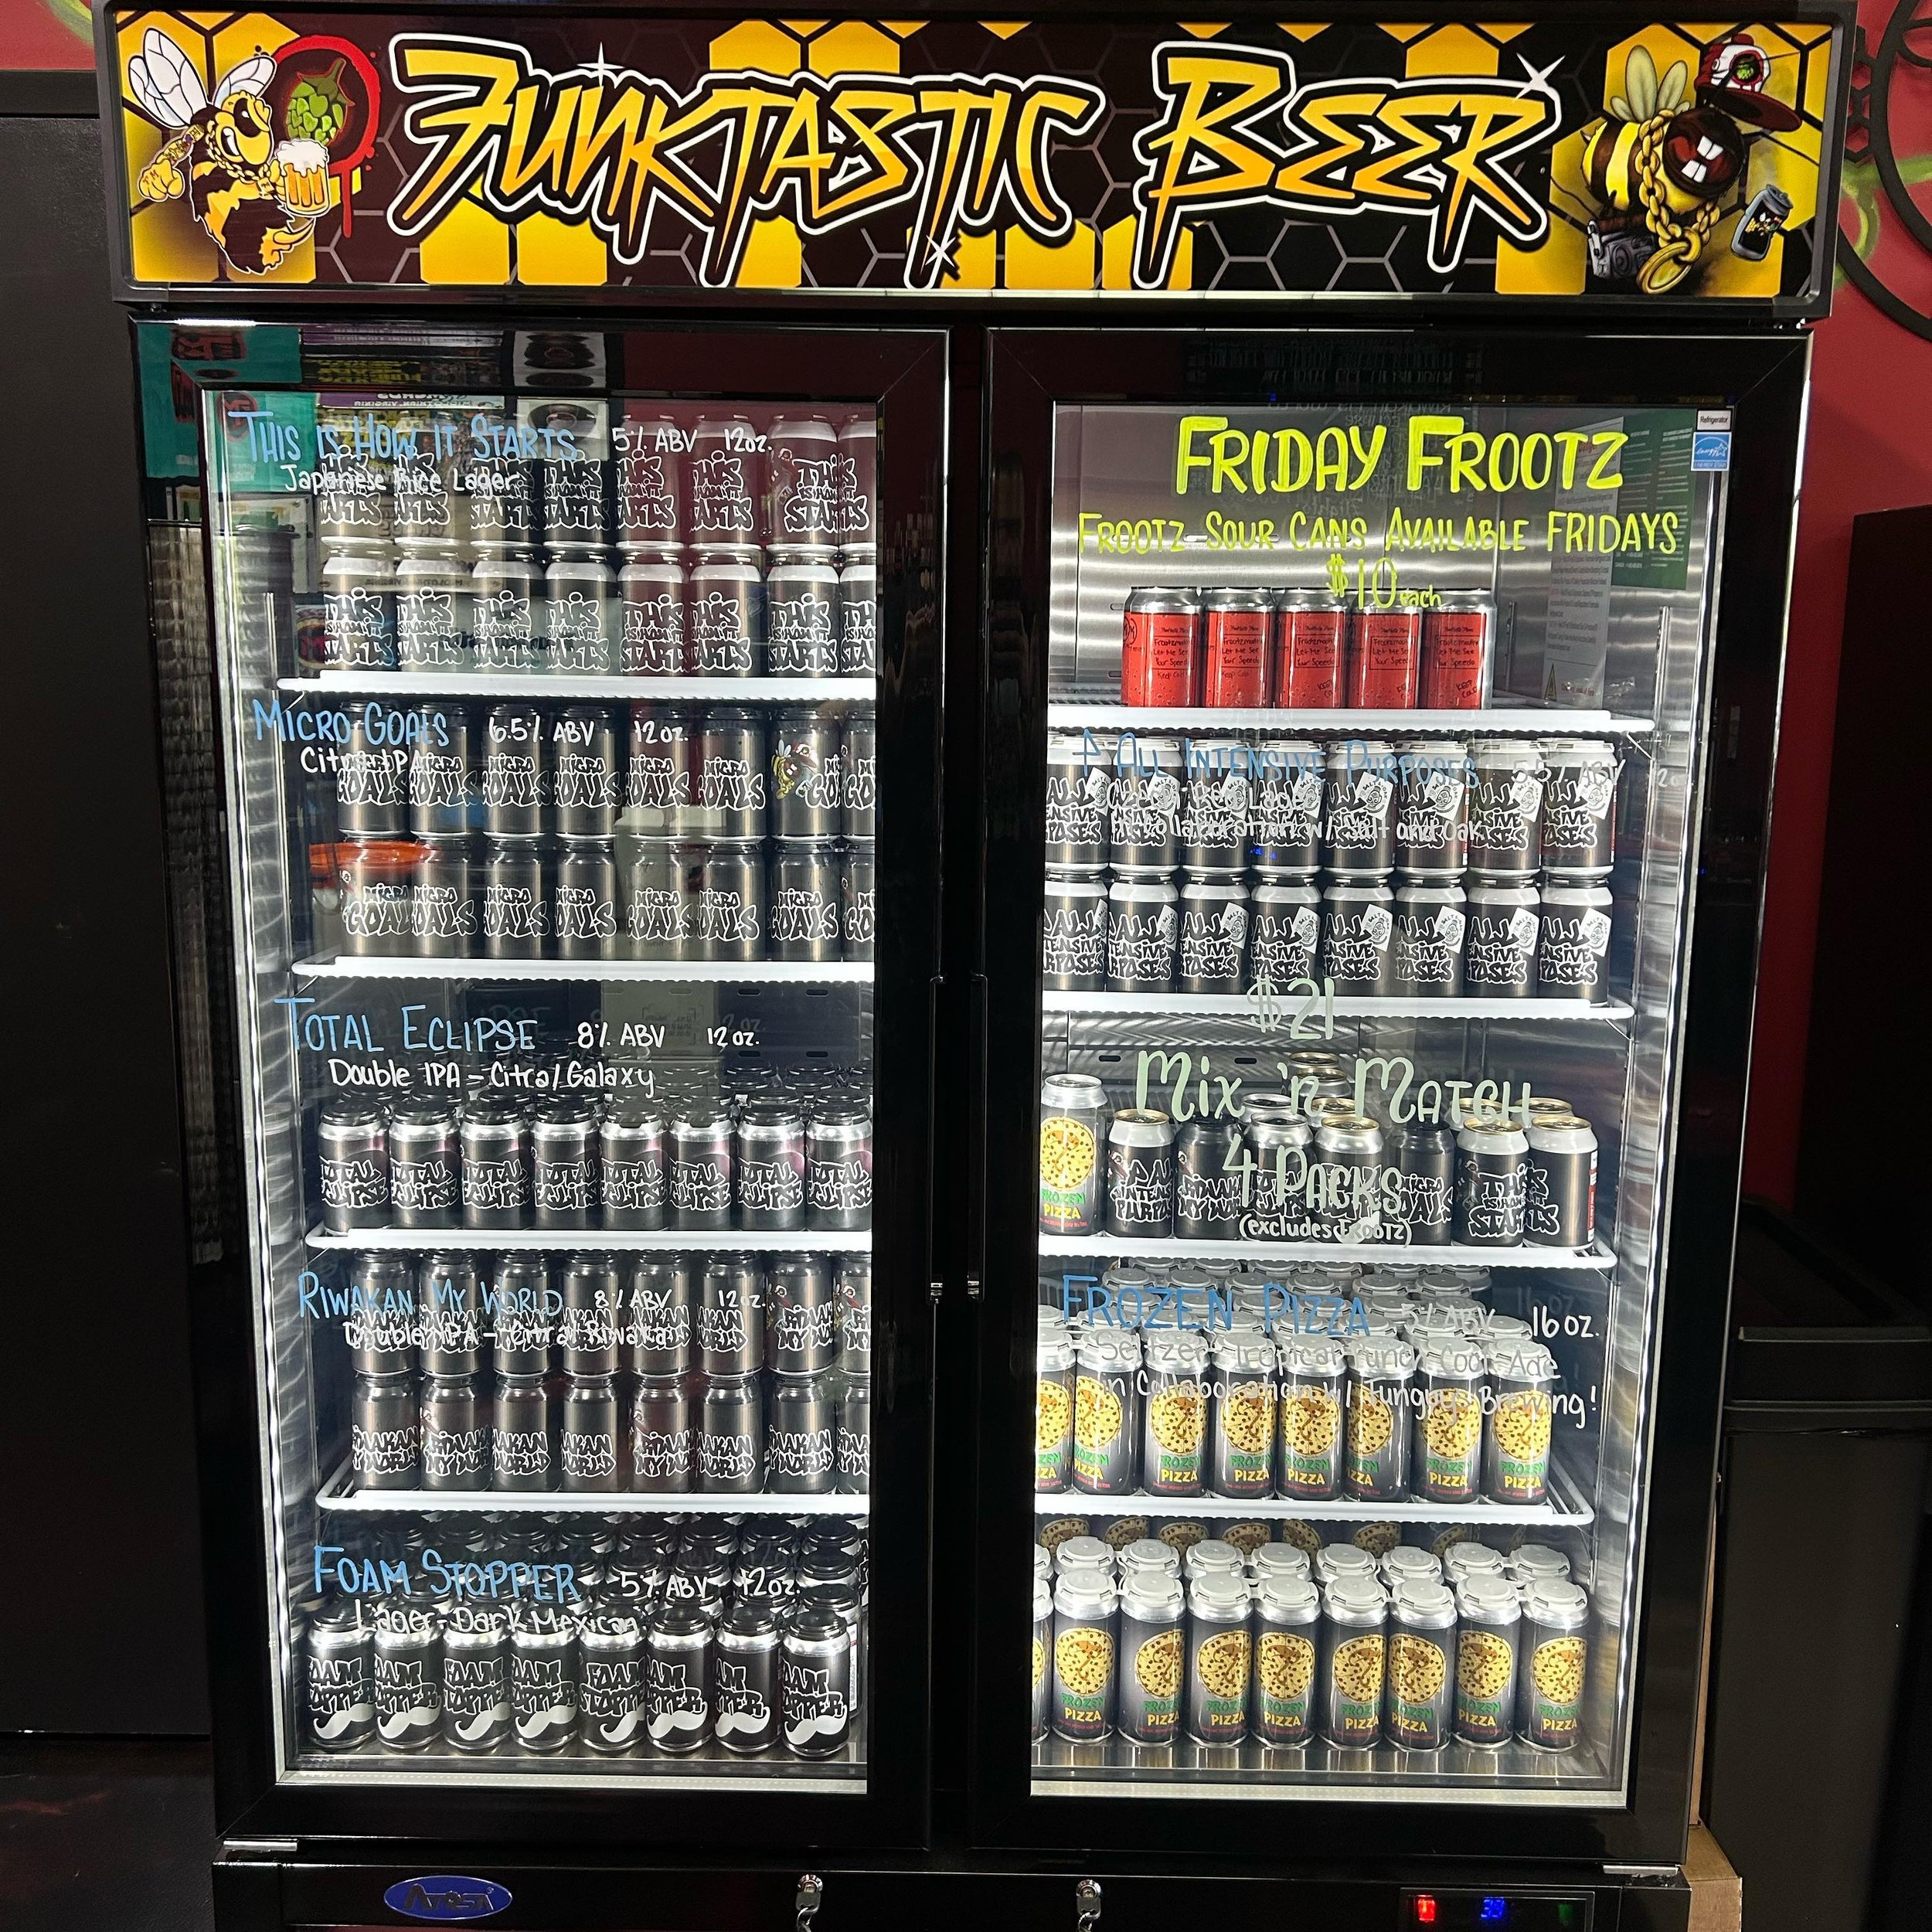 🚨We&rsquo;ve got a stocked cooler today including a few cans of Funktastic Frootz&hellip;This week&rsquo;s flavor👇👇👇

Frootzmoothie- Let Me See Your Speedo
➡️Fruited smoothie sour with Strawberry, Kumquat and Vegan/non-Dairy Pastry Kreme

Several